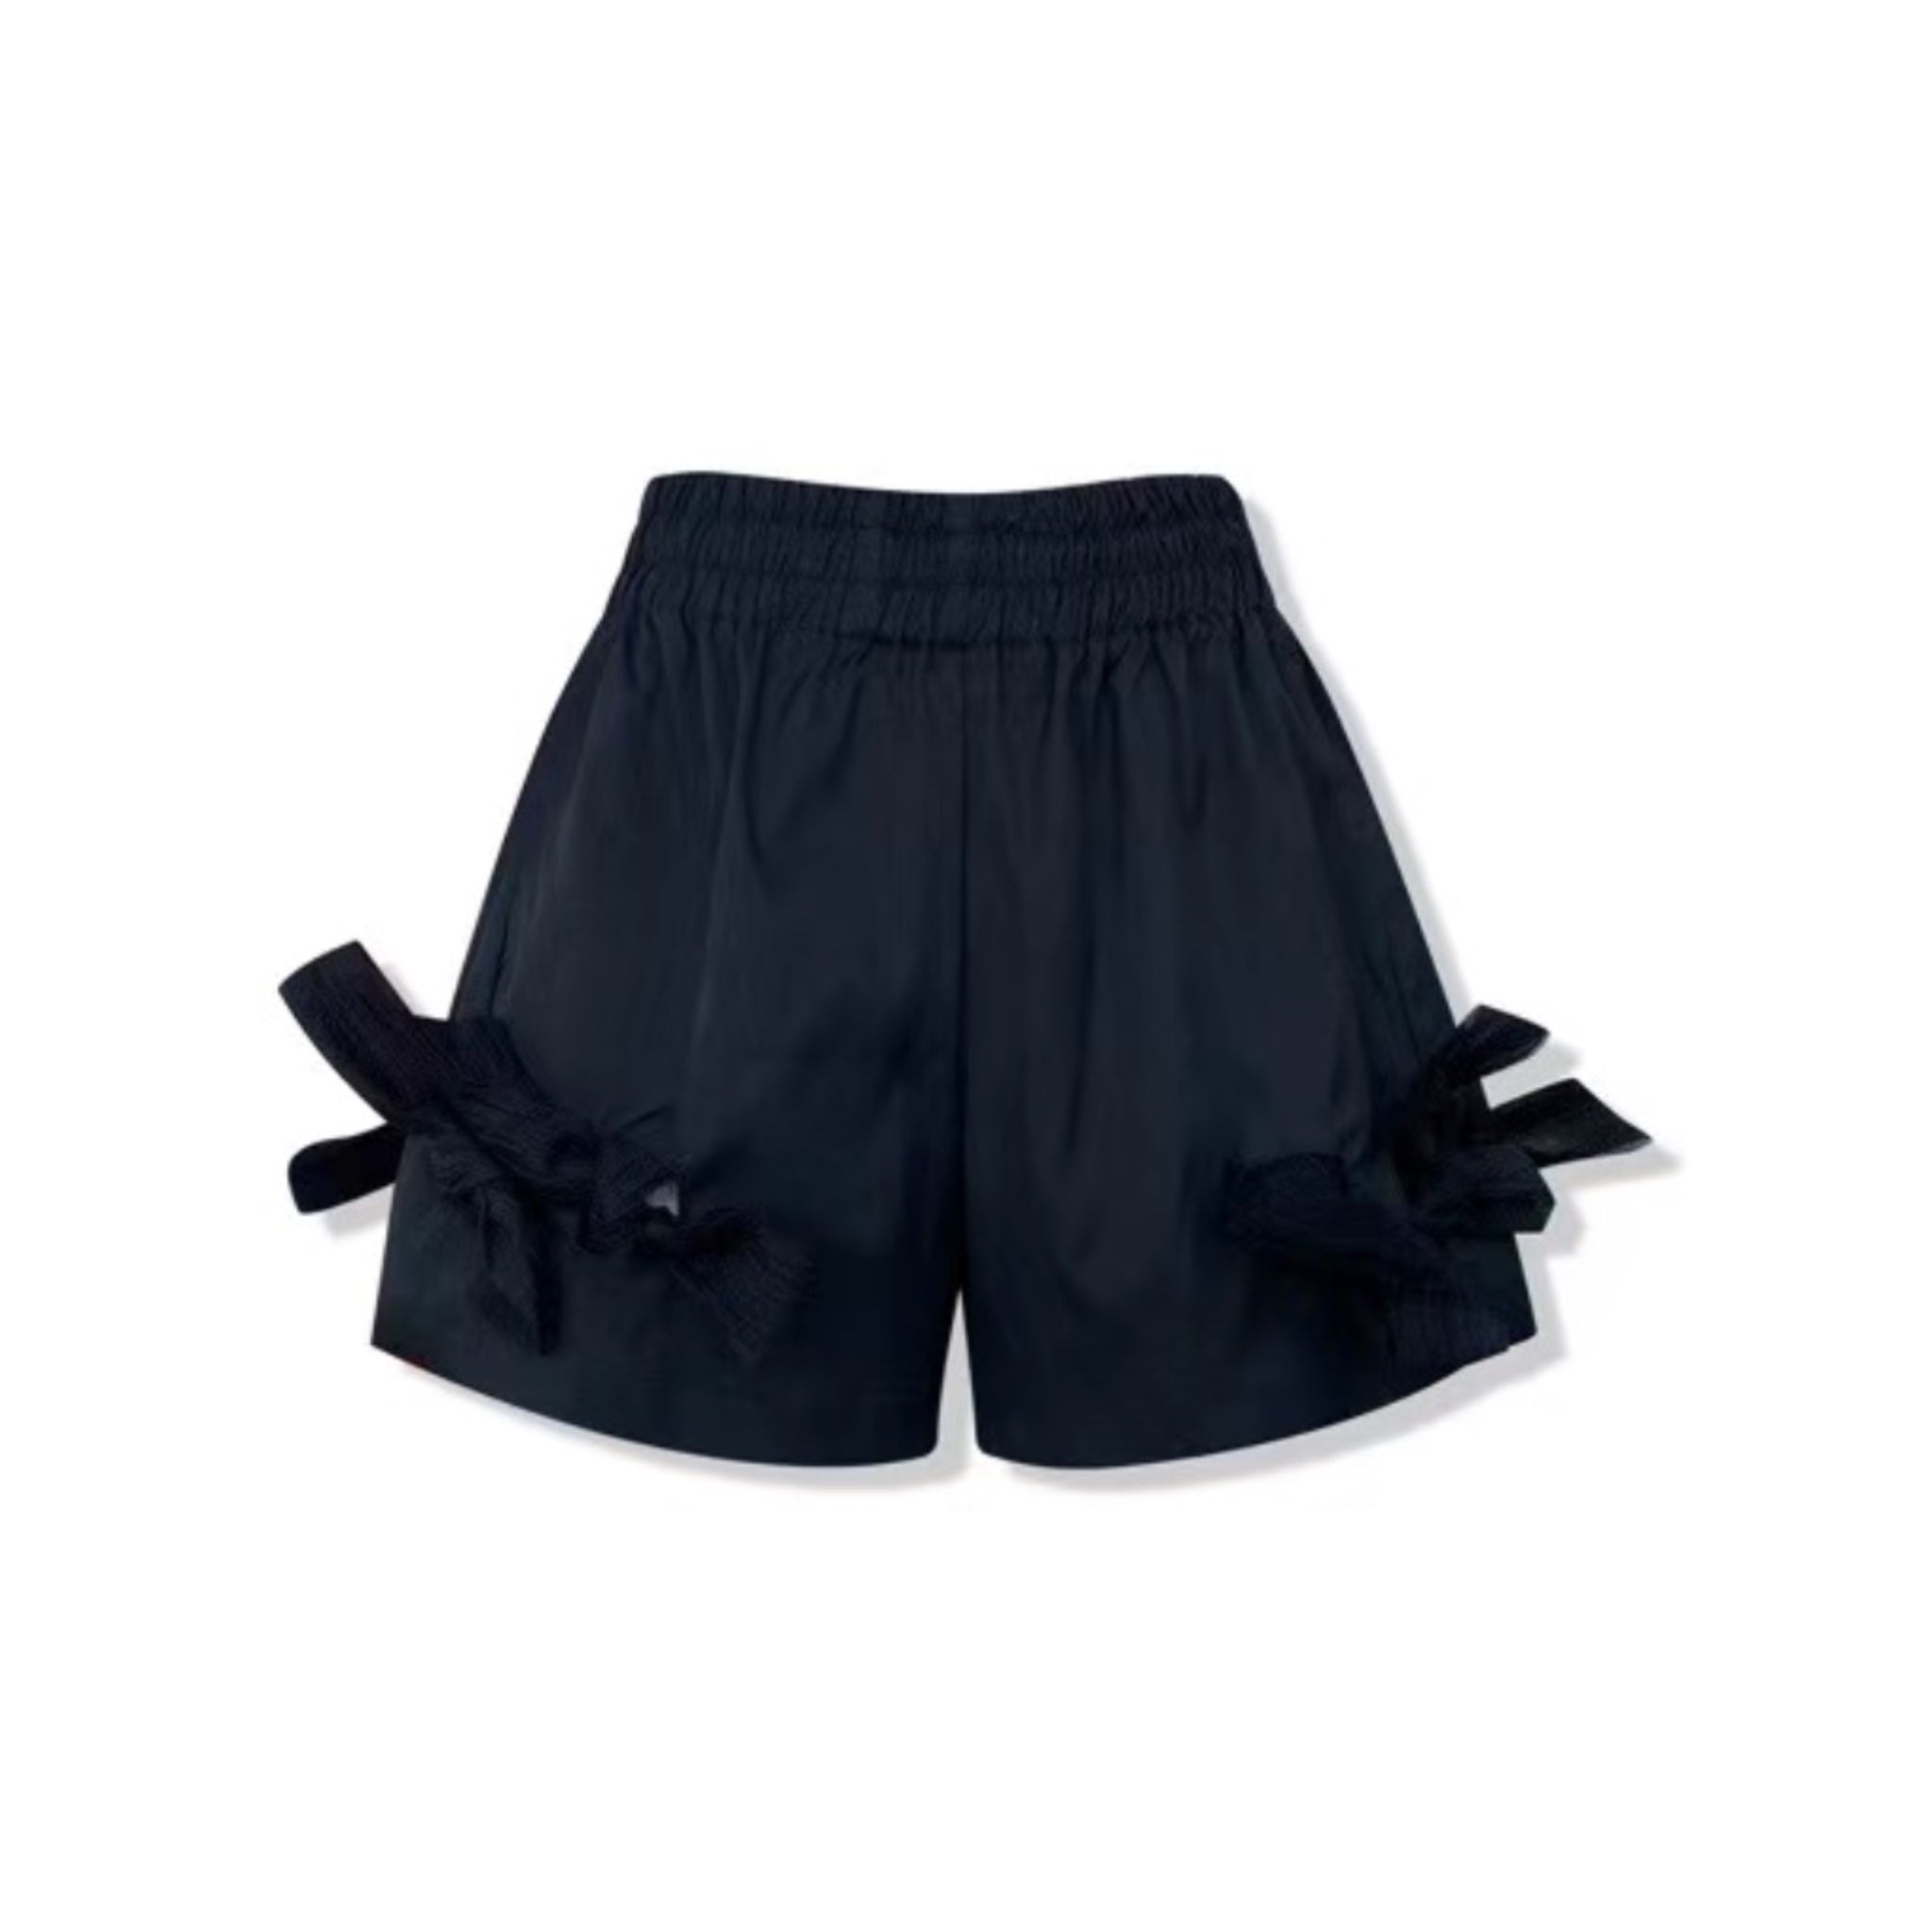 NOT FOR US Bow Black Shorts | MADA IN CHINA